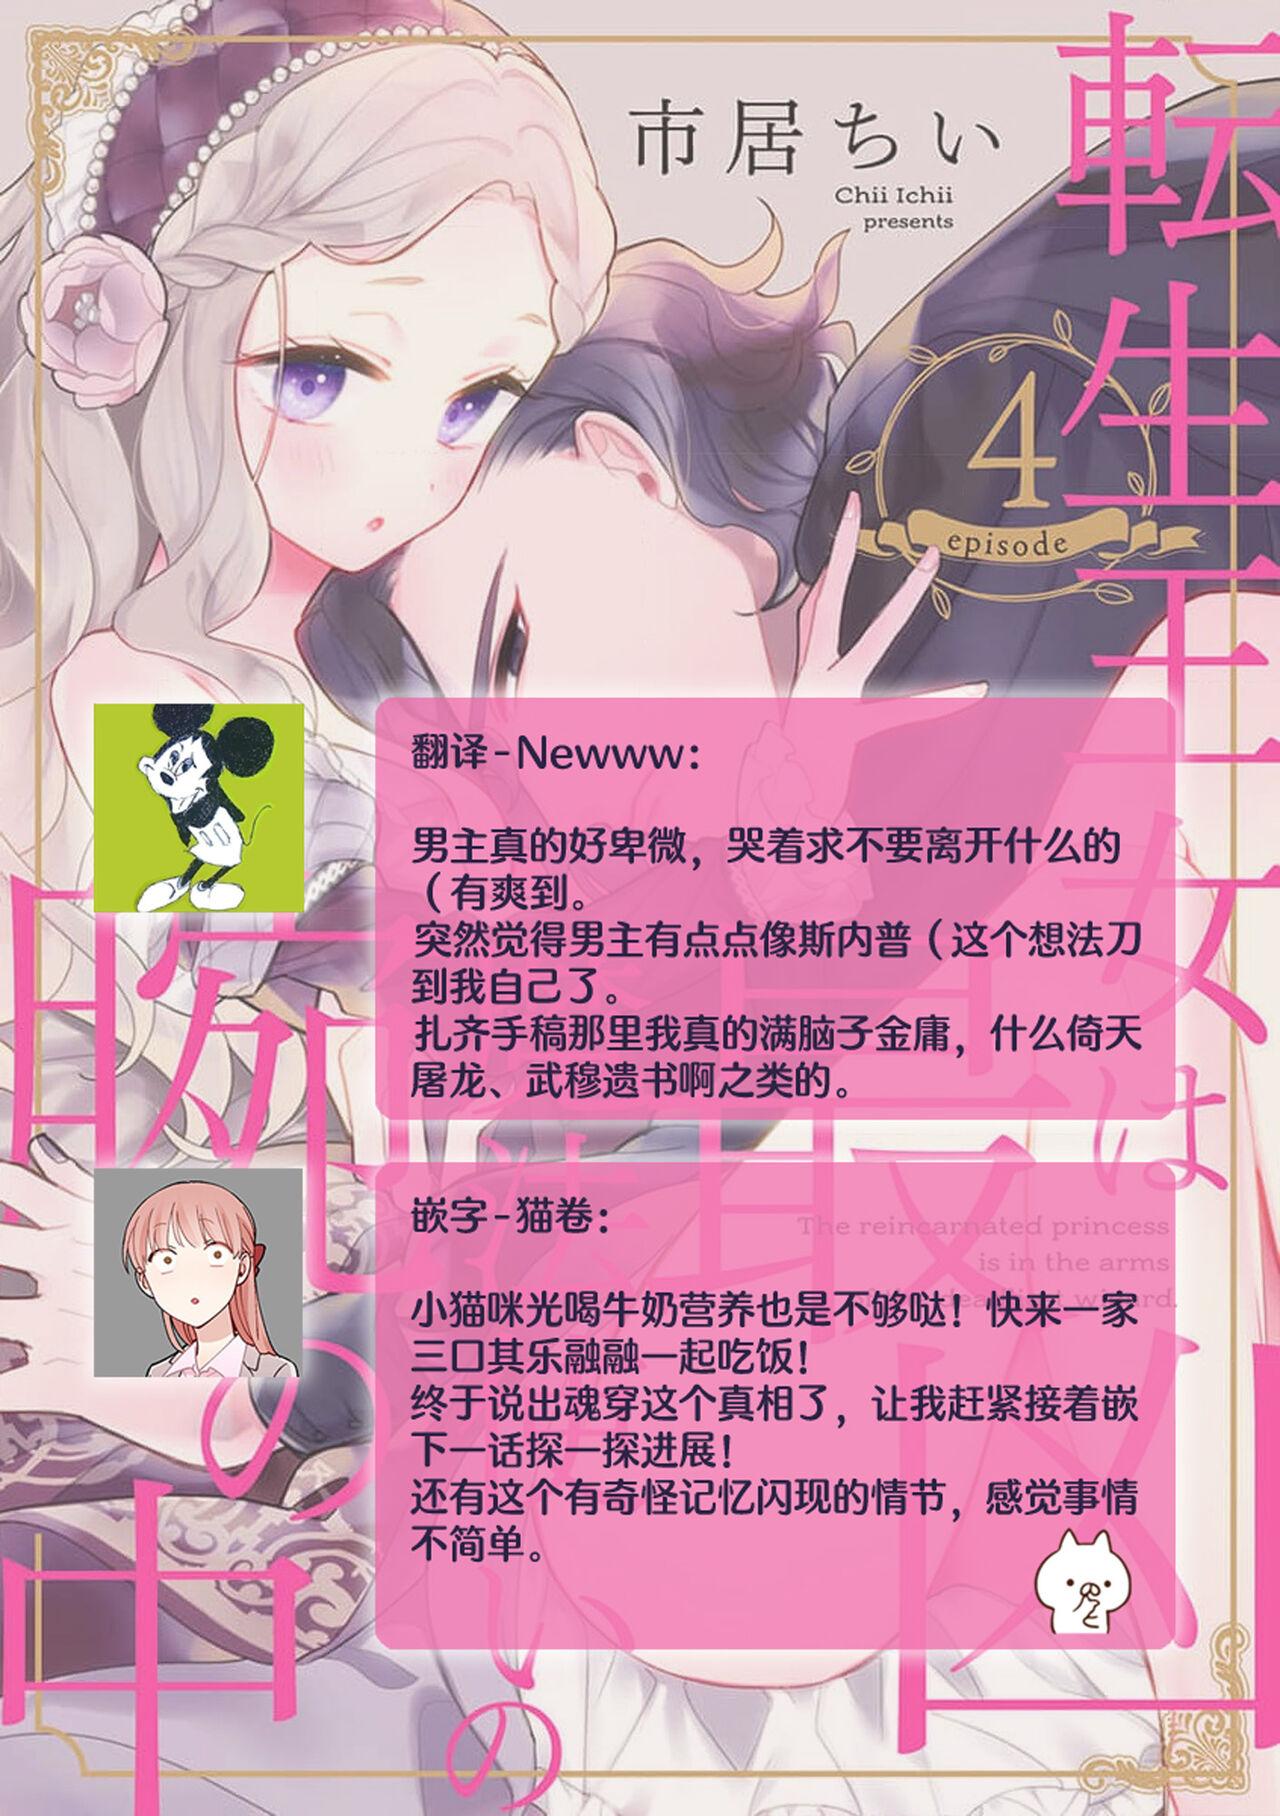 Dick Sucking The reincarnated princess is in the arms of the deadliest wizard | 与凶恶魔法师拥抱的重生王女 1-4 Sexo - Page 112